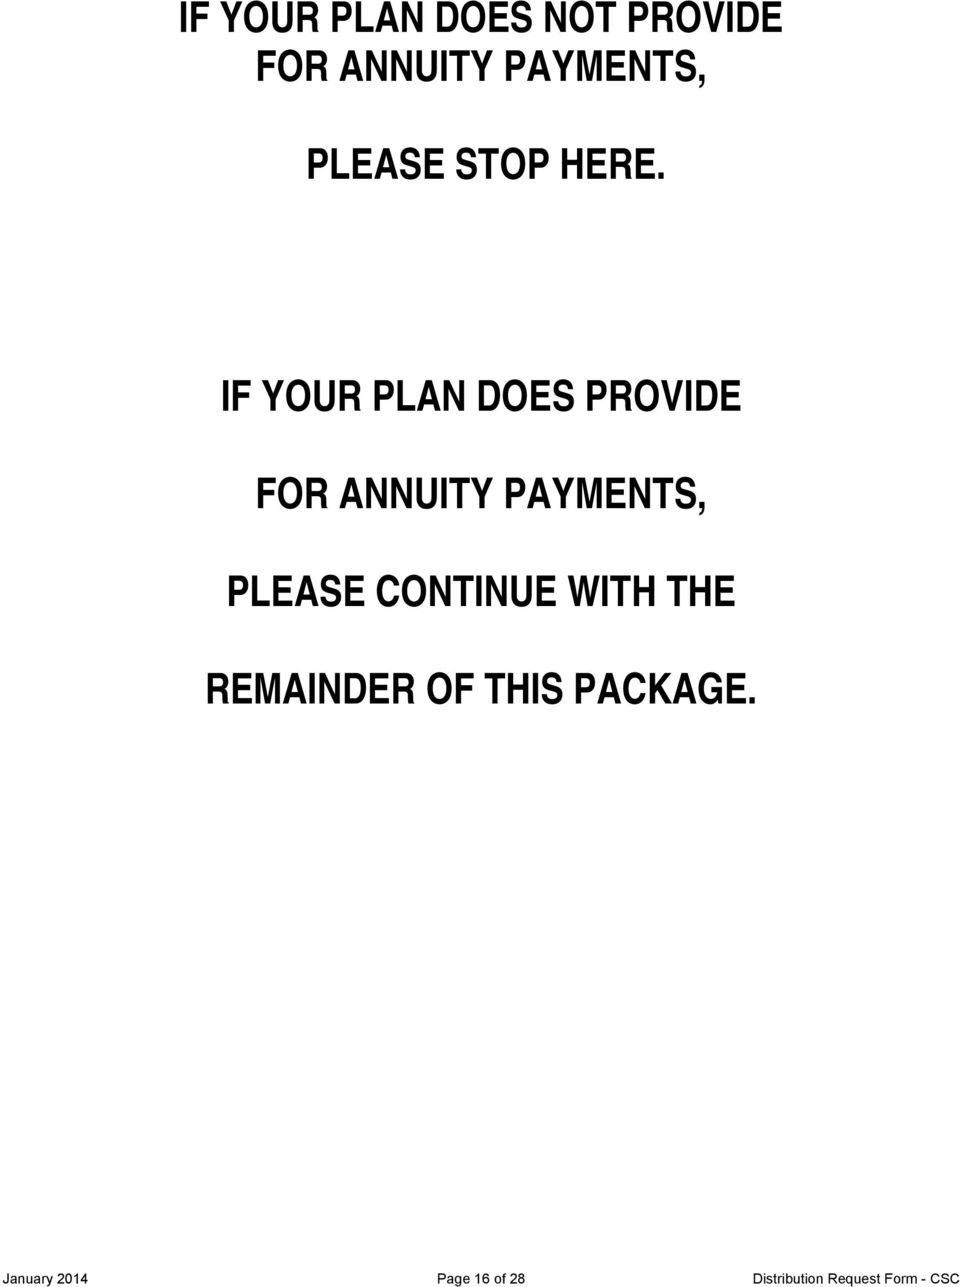 IF YOUR PLAN DOES PROVIDE FOR ANNUITY PAYMENTS, PLEASE